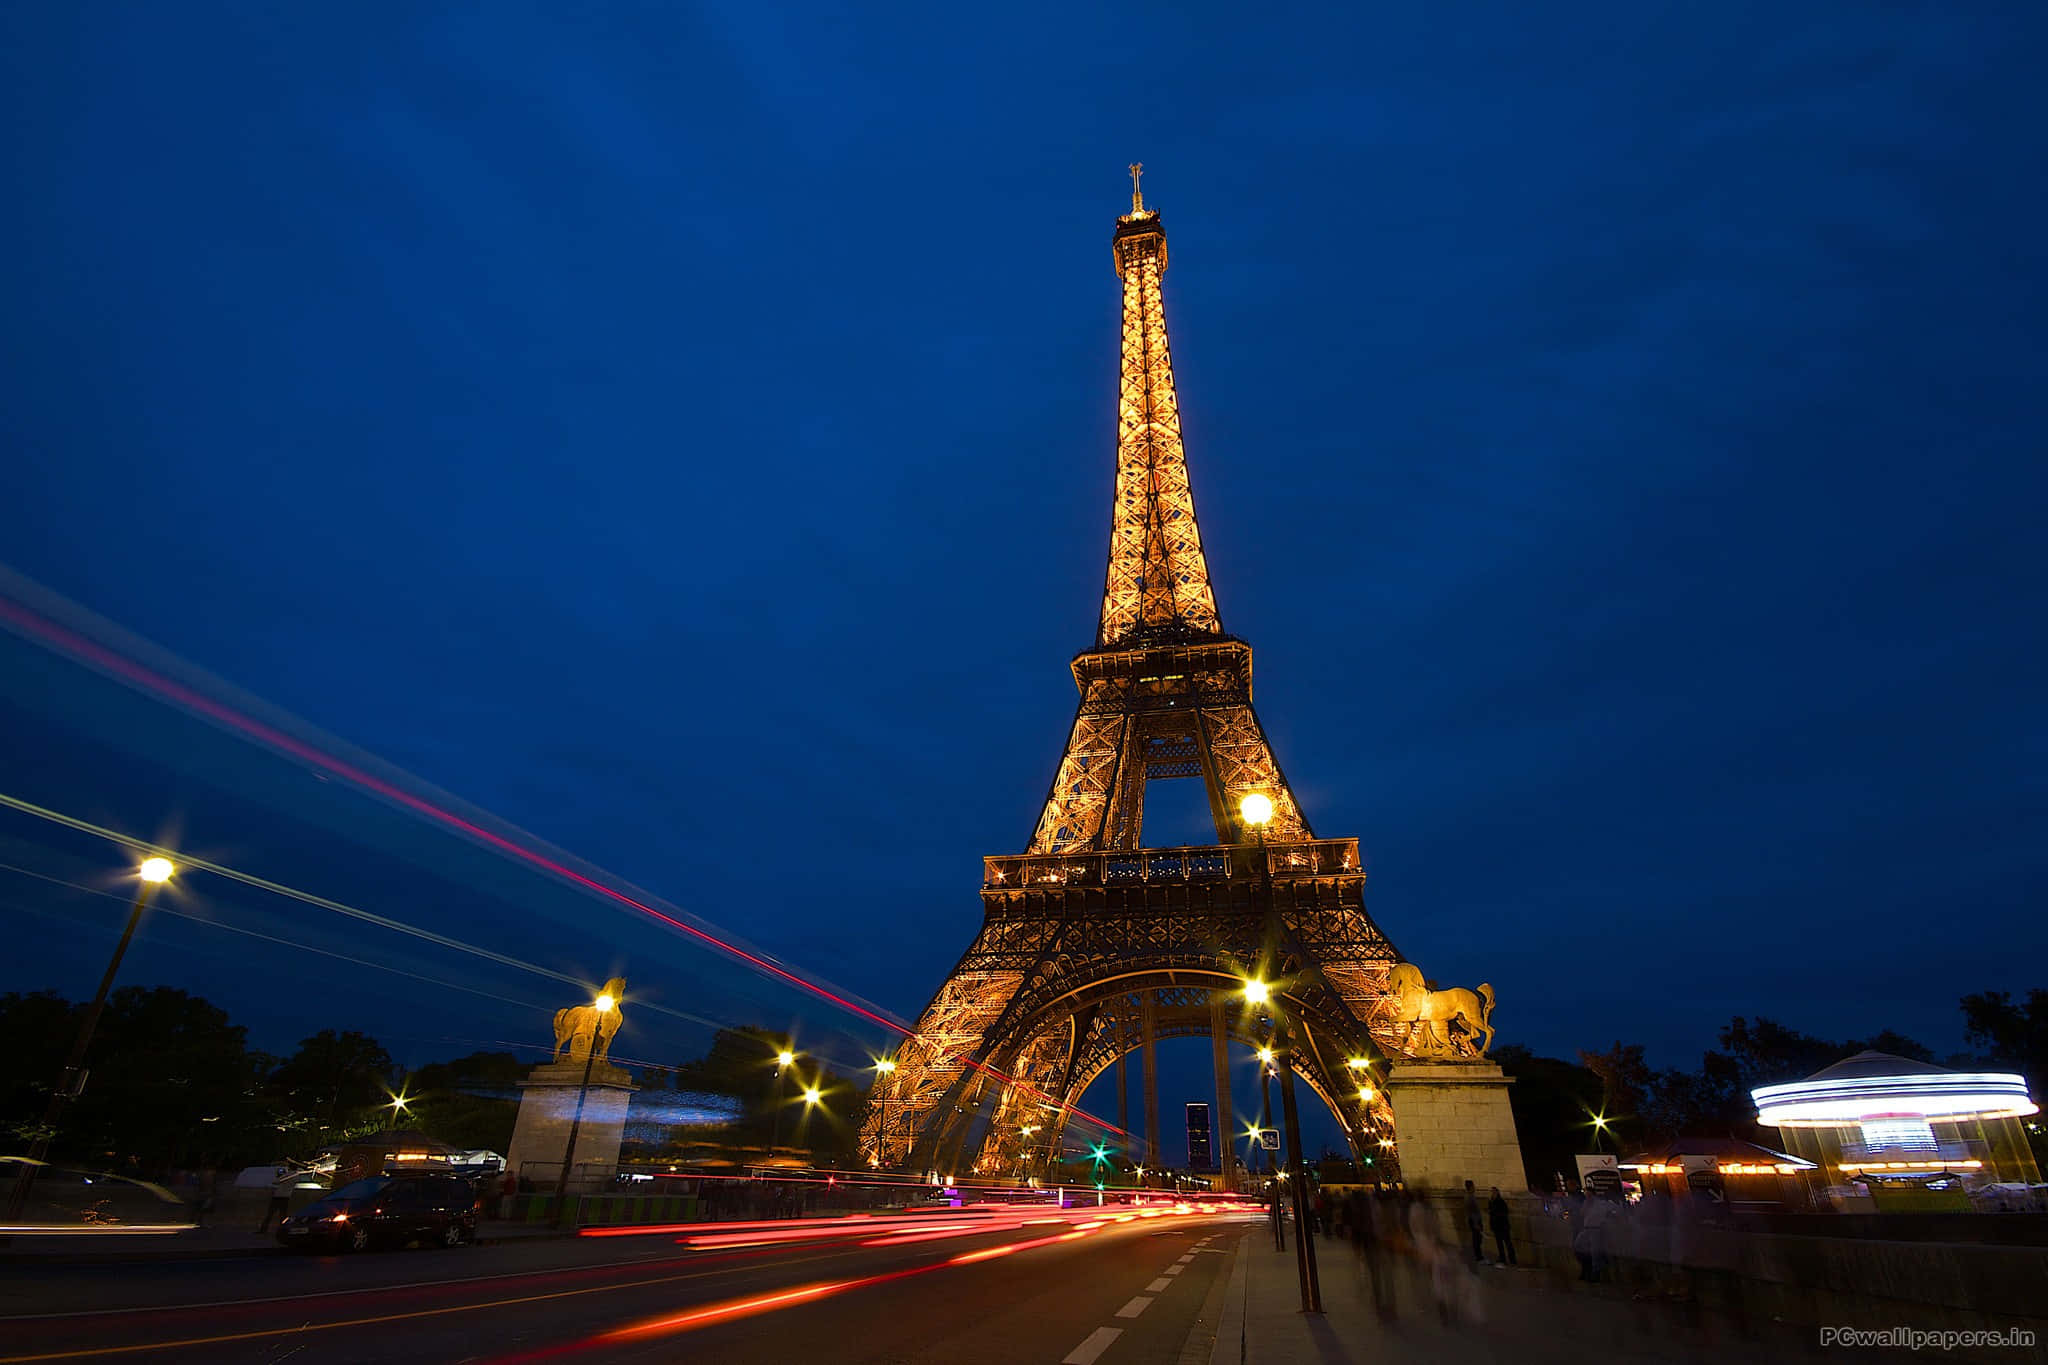 Visiting Paris? Go see the Eiffel Tower at night!